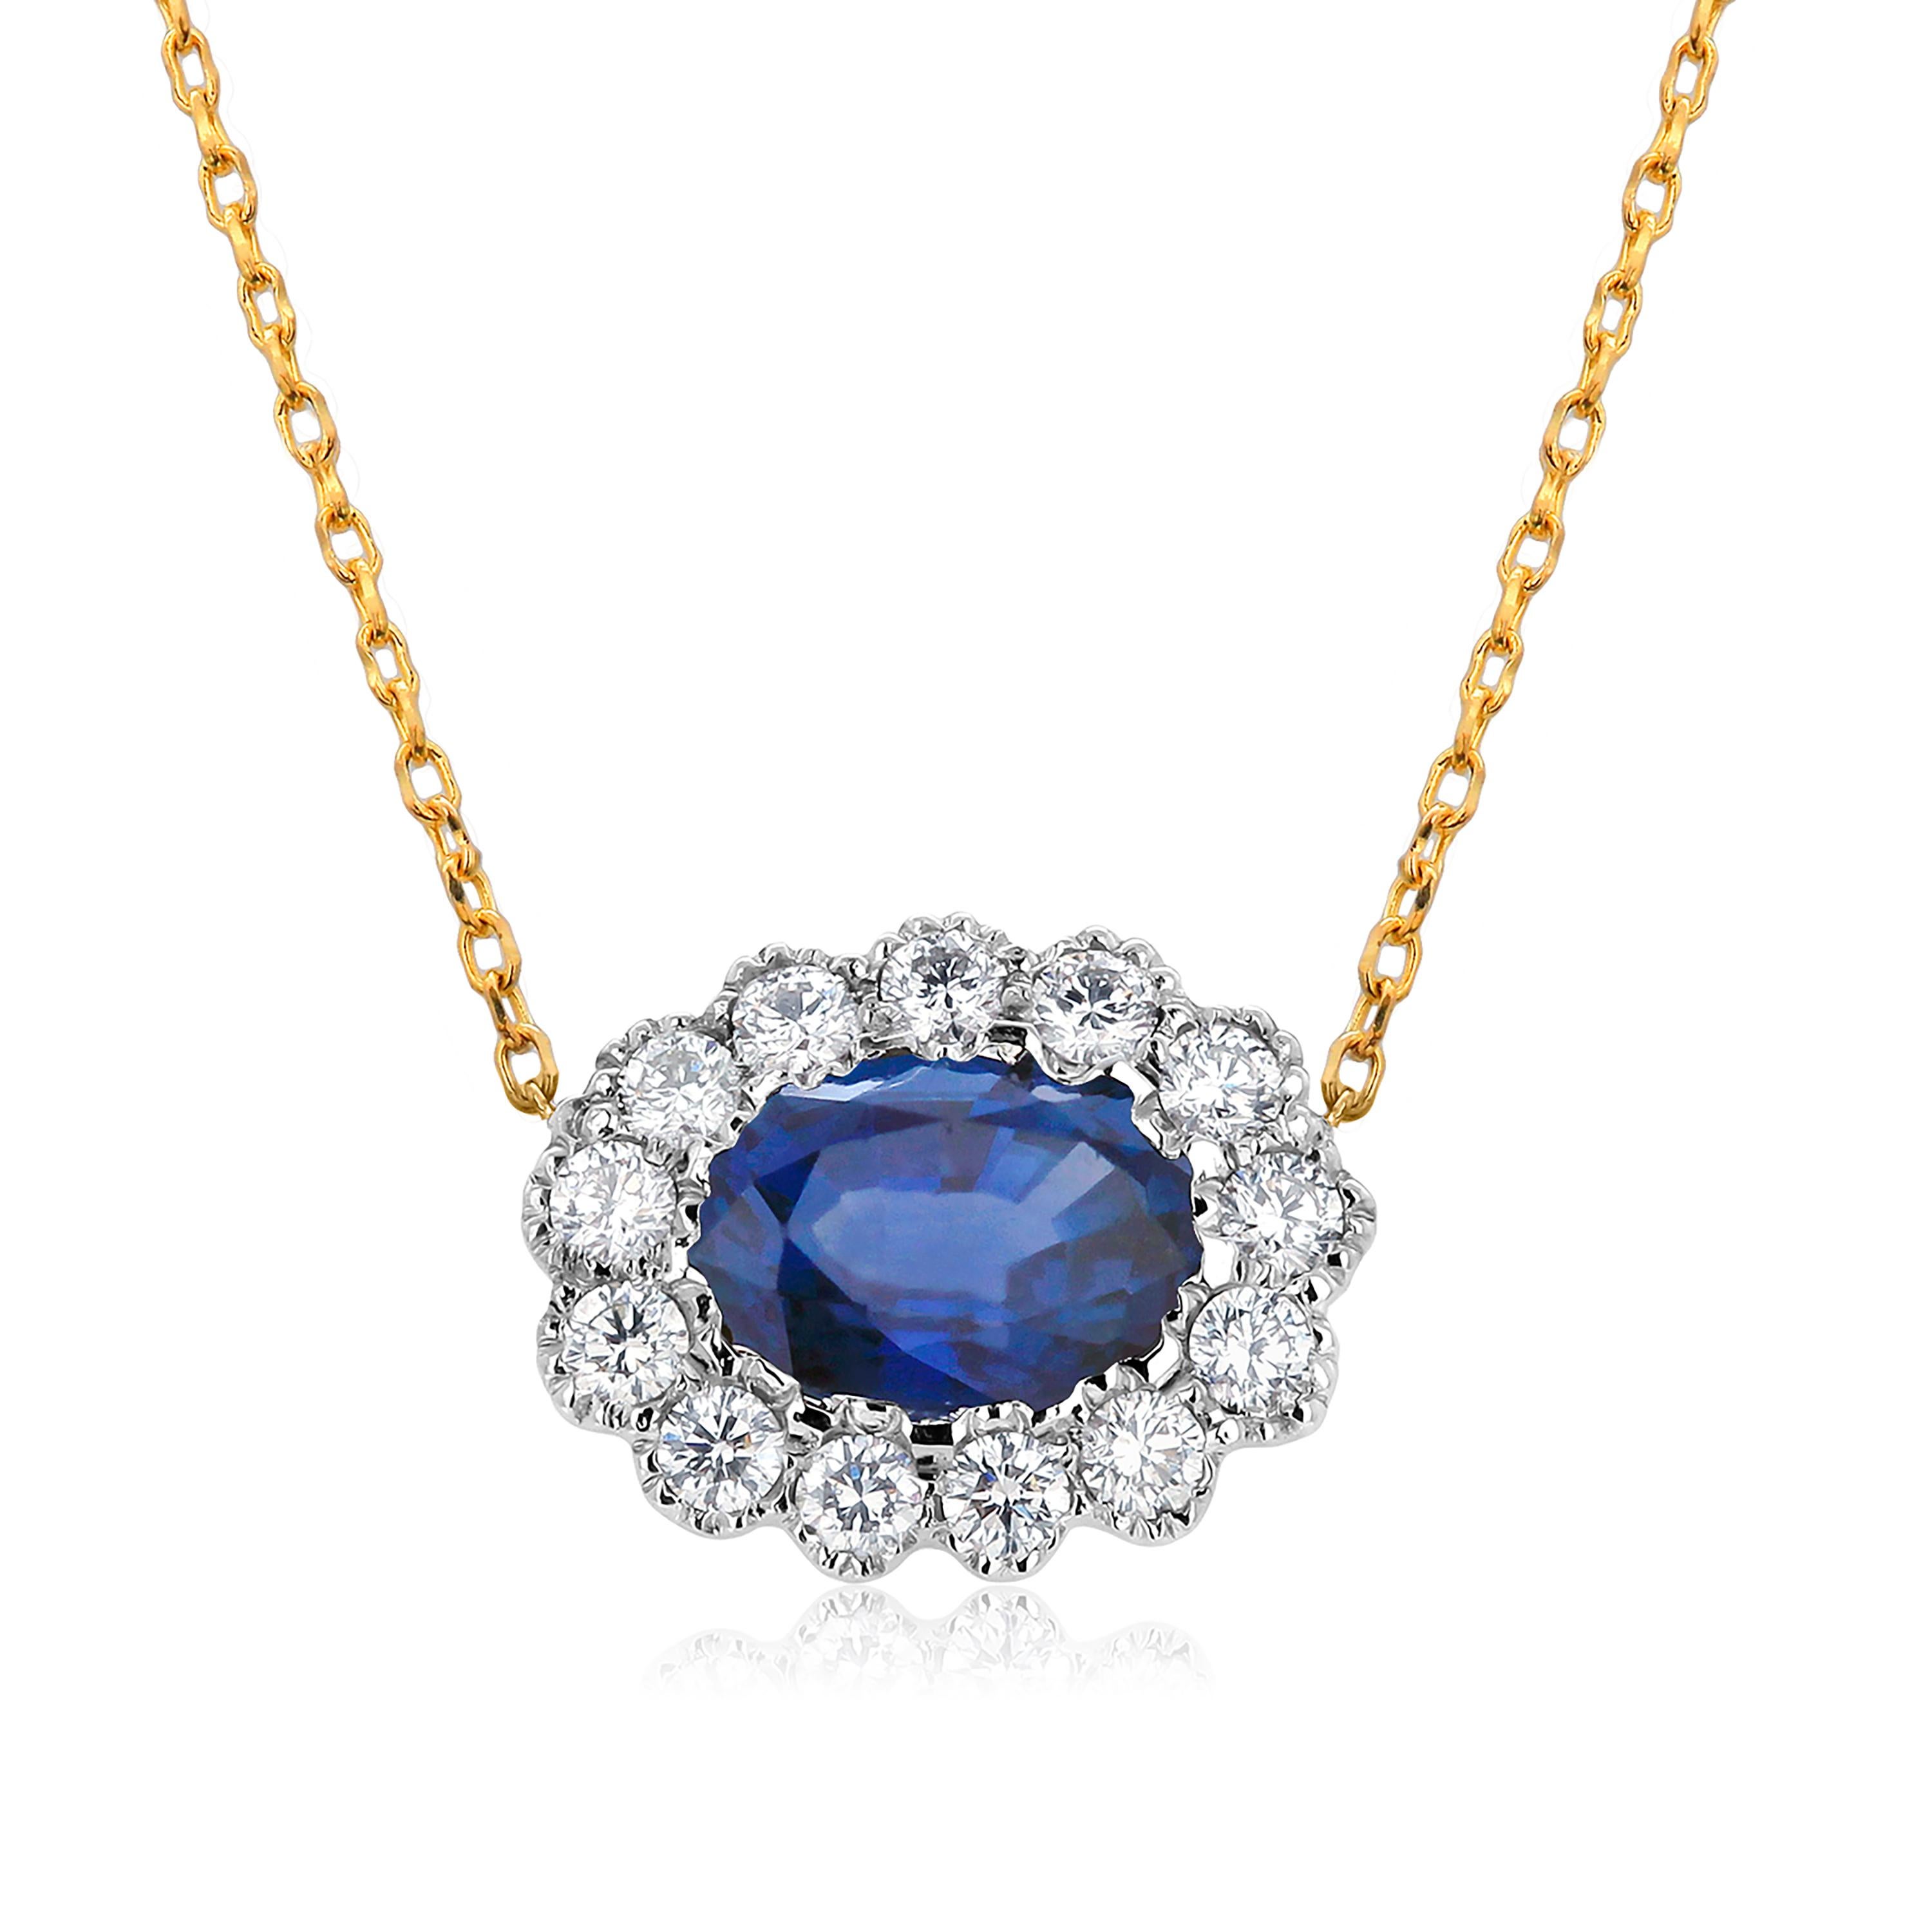 Oval Cut Oval Sapphire Surrounded by Diamonds Gold Layered Necklace Pendant